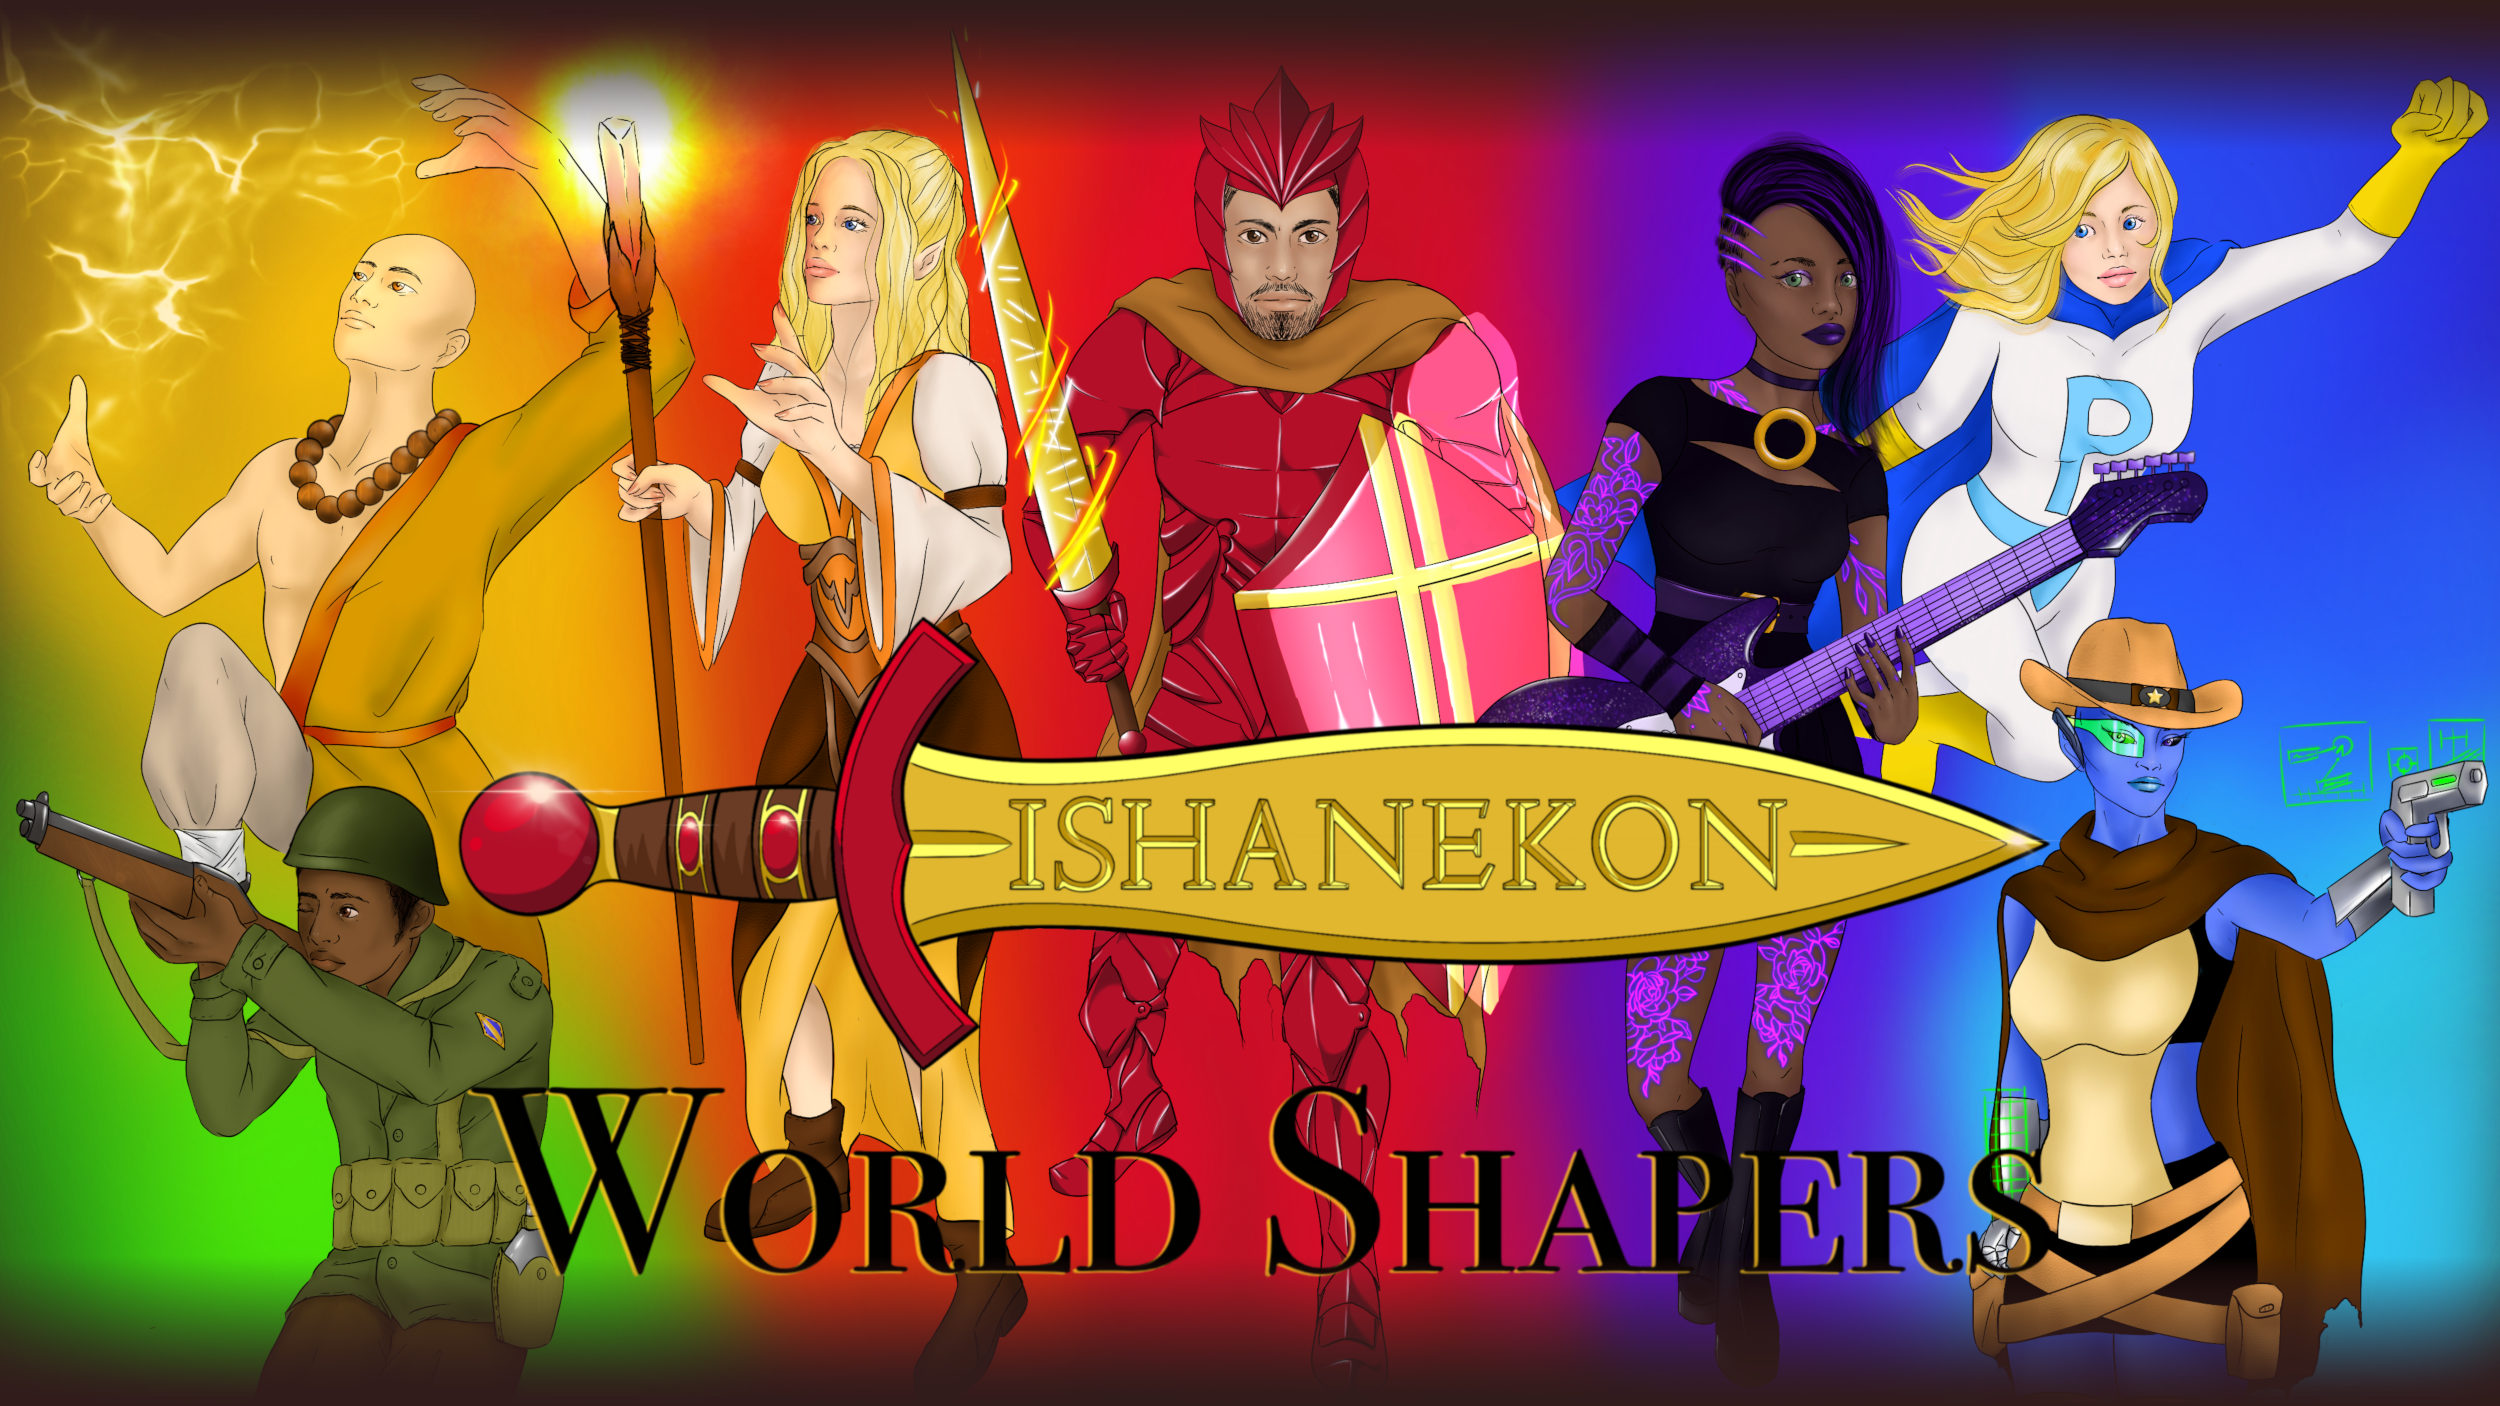 The main image with the title: Ishanekon engraved on a golden sword with a red child and under it World Shapers. Behind that, we have seven characters, each representing a different color of the rainbow. From left to right: Green, a world war II soldier. Yellow, an Asian monk channeling lighting. Organe: A elf wielding a magic stave with an orange crystal. Red: Blaze Reason, the author of this game, wearing a crimson plate armor with a golden sword in one hand and a shield in the other. Purple, a goth guitarist with glowing tattoos. Blue: A superhero with a P on her chest. Tozurcuese: A alien with a cowboy hat and a pistol with holograms.